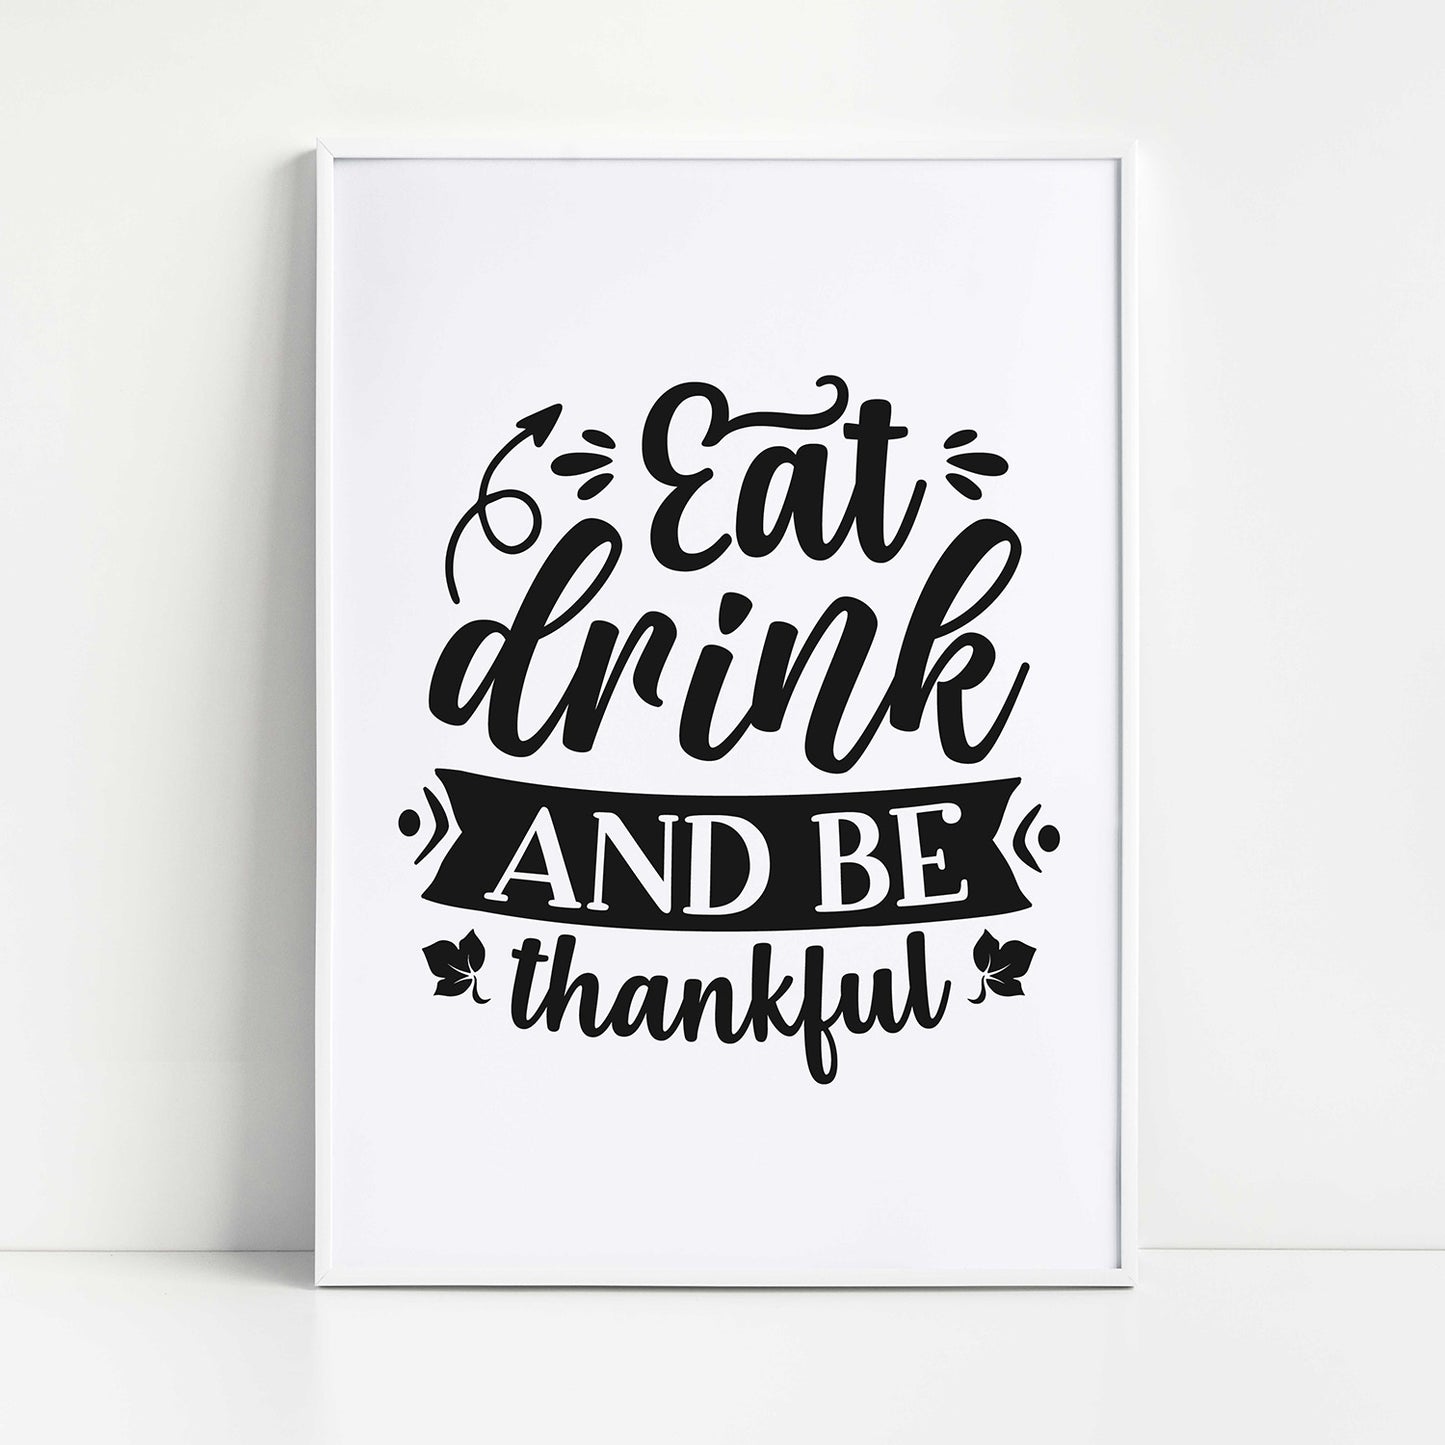 "Eat Drink And Be Thankful" Graphic